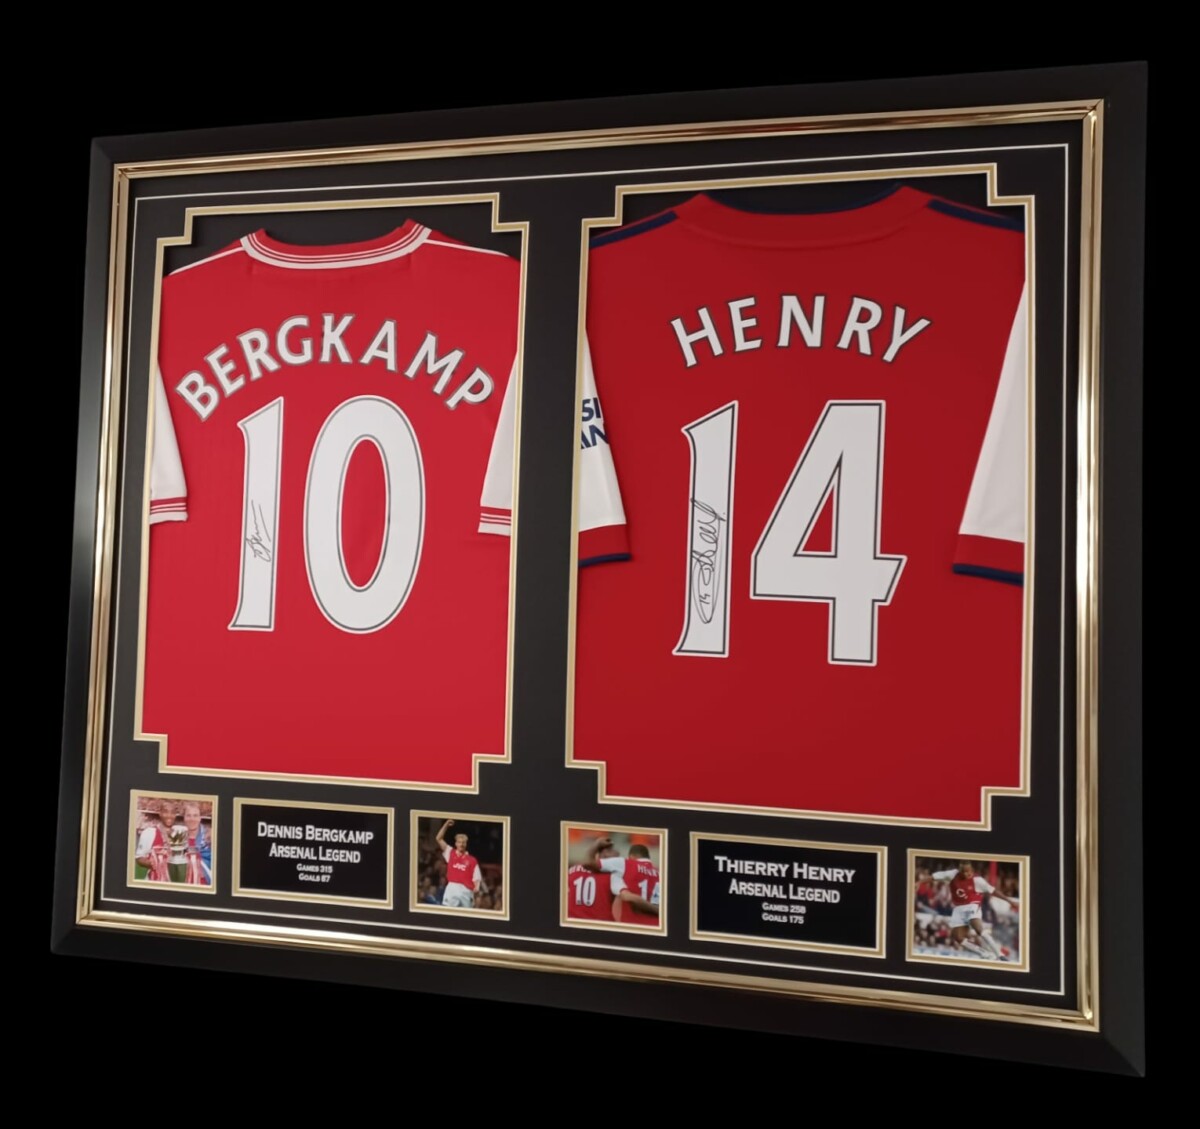 thierry henry autographed jersey